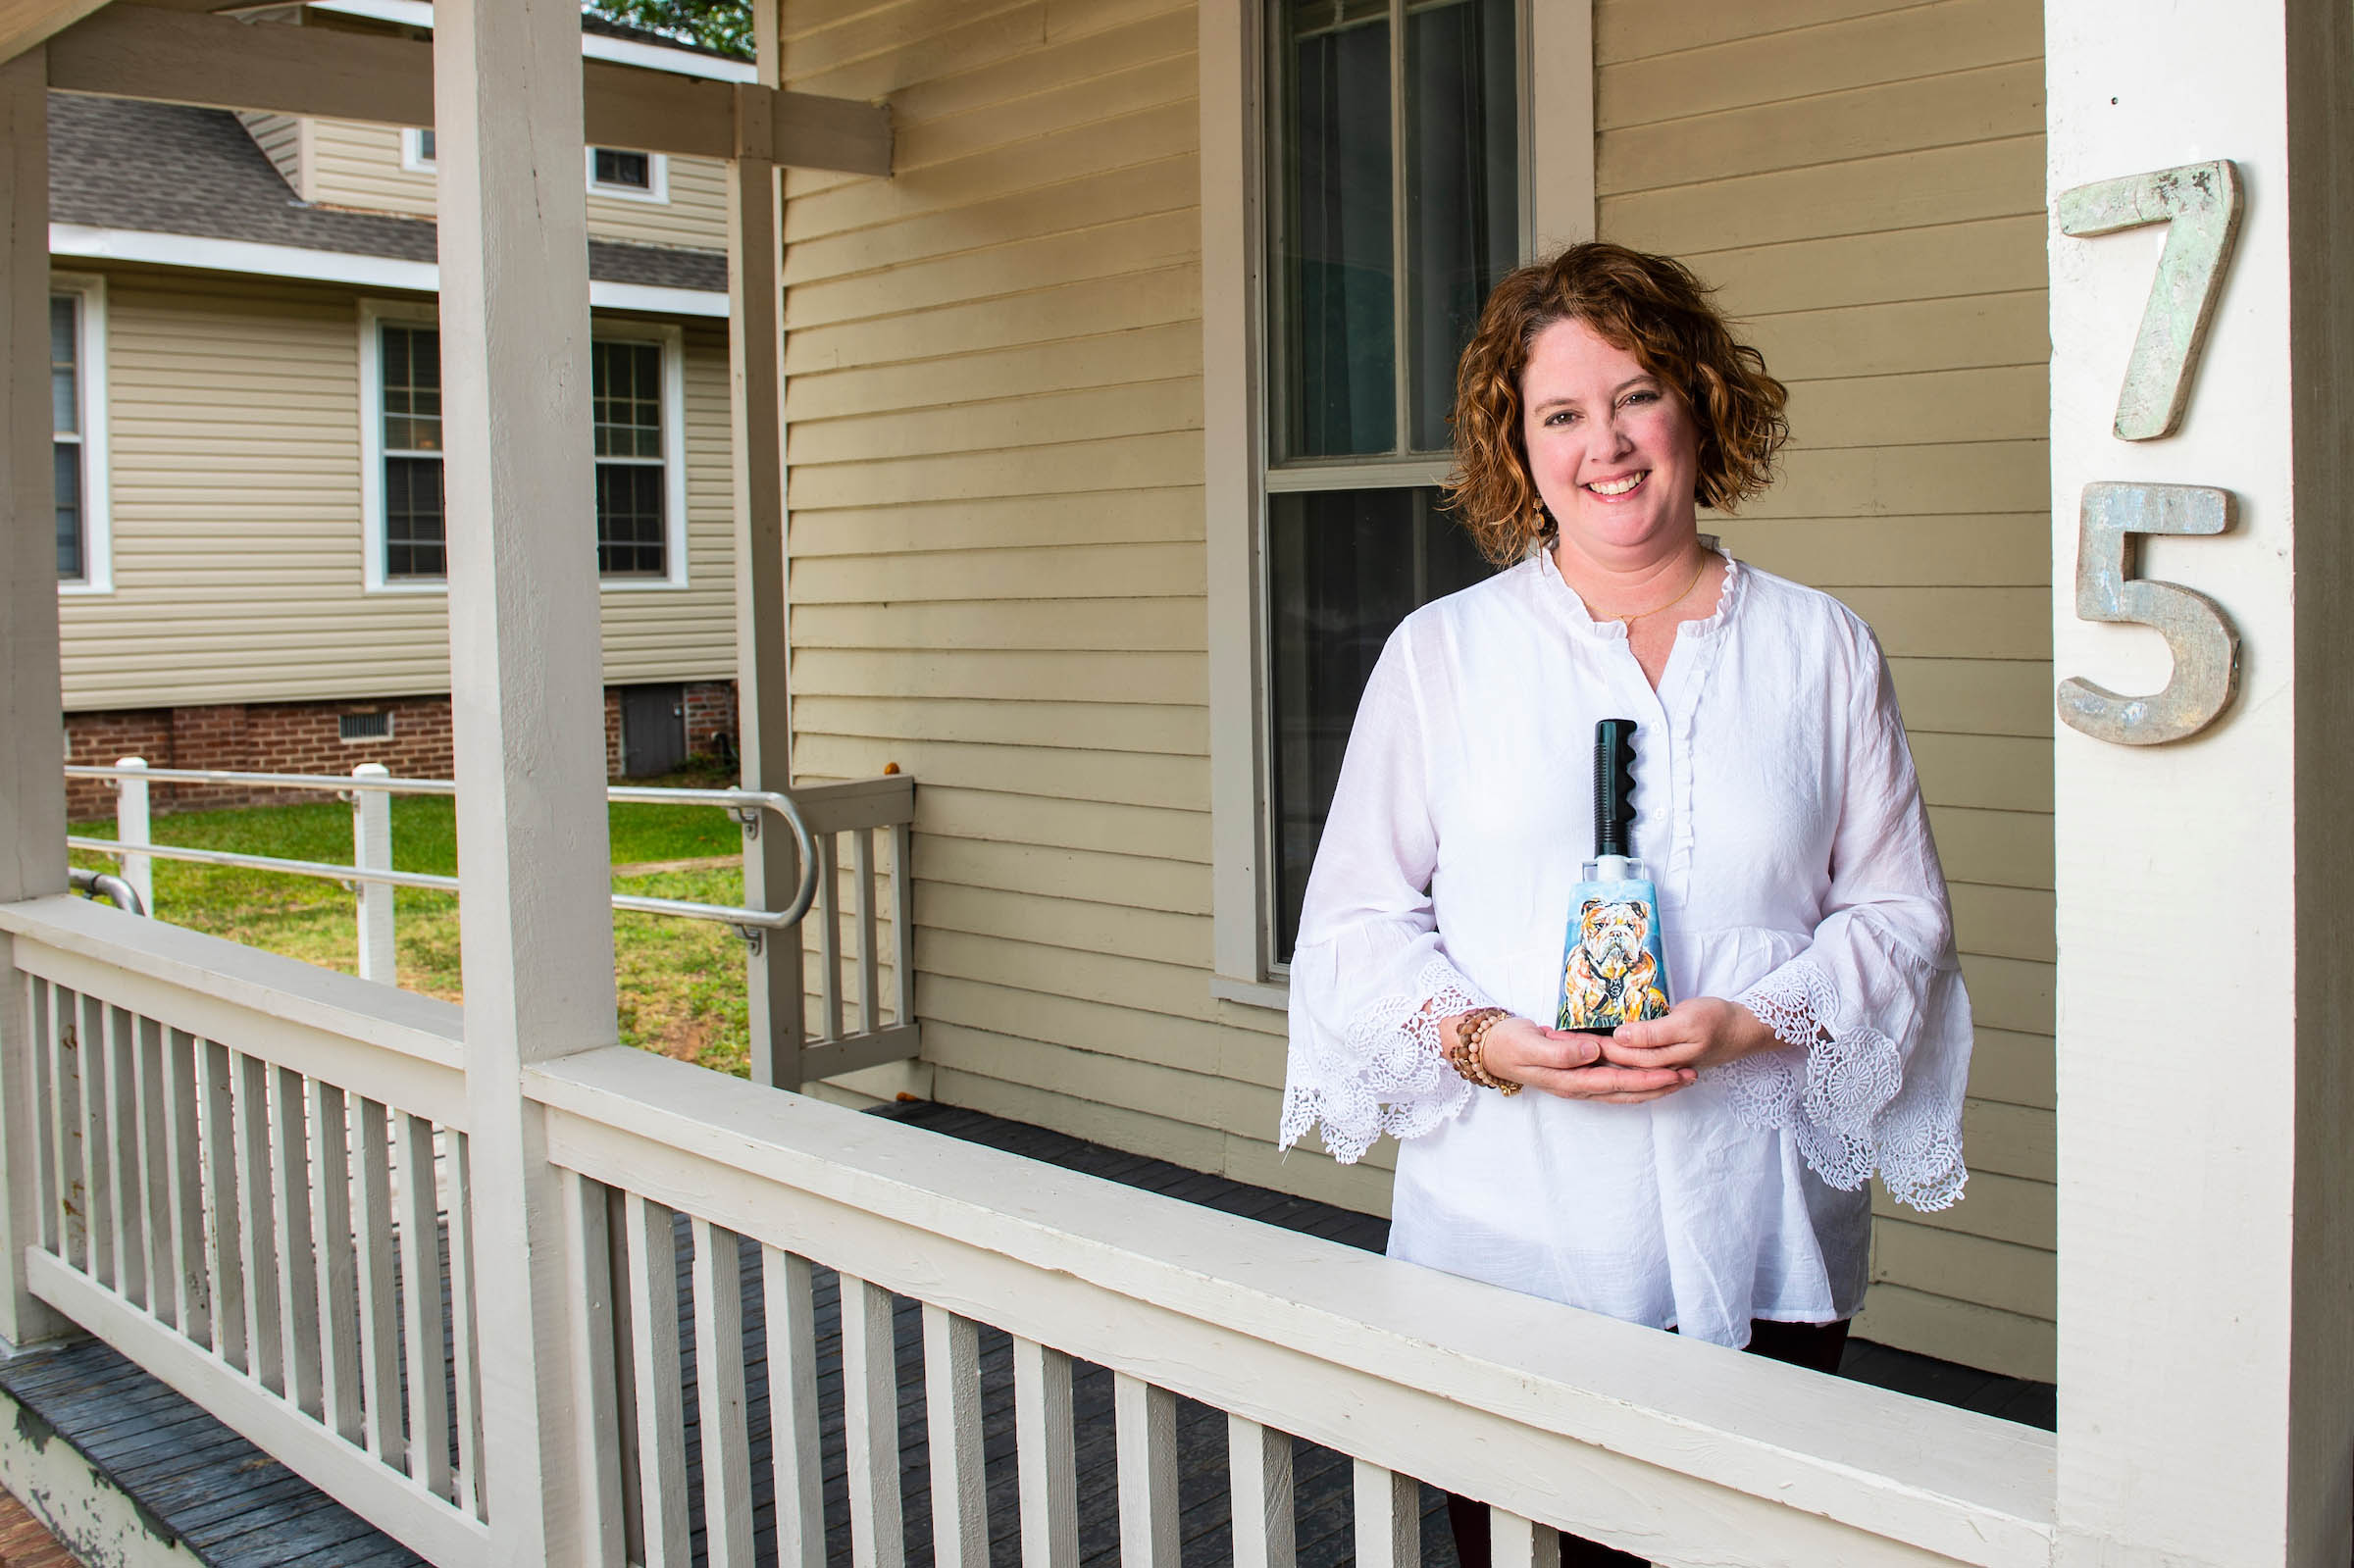 A photo of Christa King standing on a porch with a cowbell in her hand.